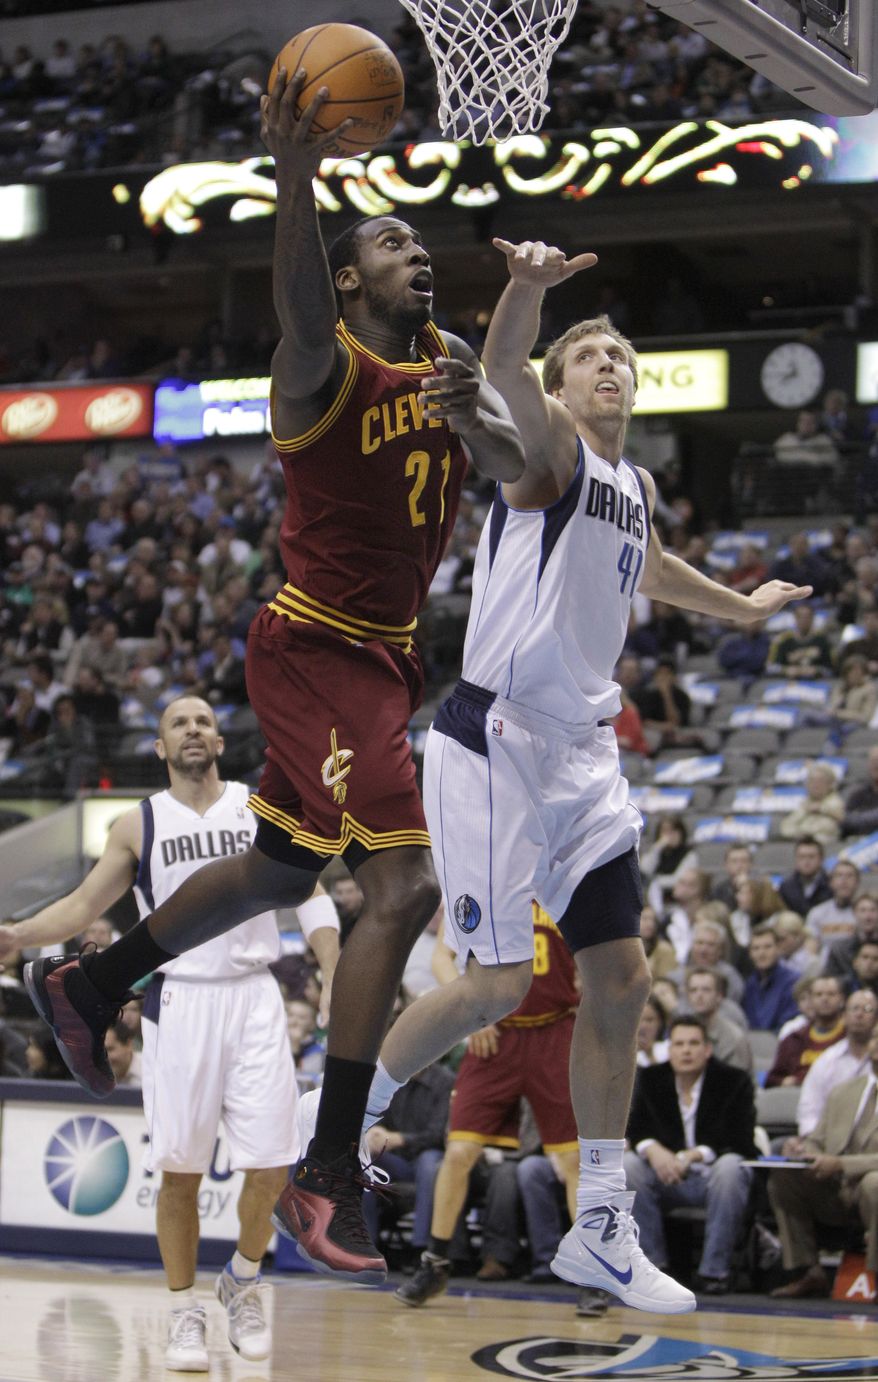 Cleveland Cavaliers power forward J.J. Hickson (21) shoots against Dallas Mavericks power forward Dirk Nowitzki (41) during the first half of a NBA basketball game in Dallas on Monday, Feb. 7, 2011. (AP Photo/LM Otero)